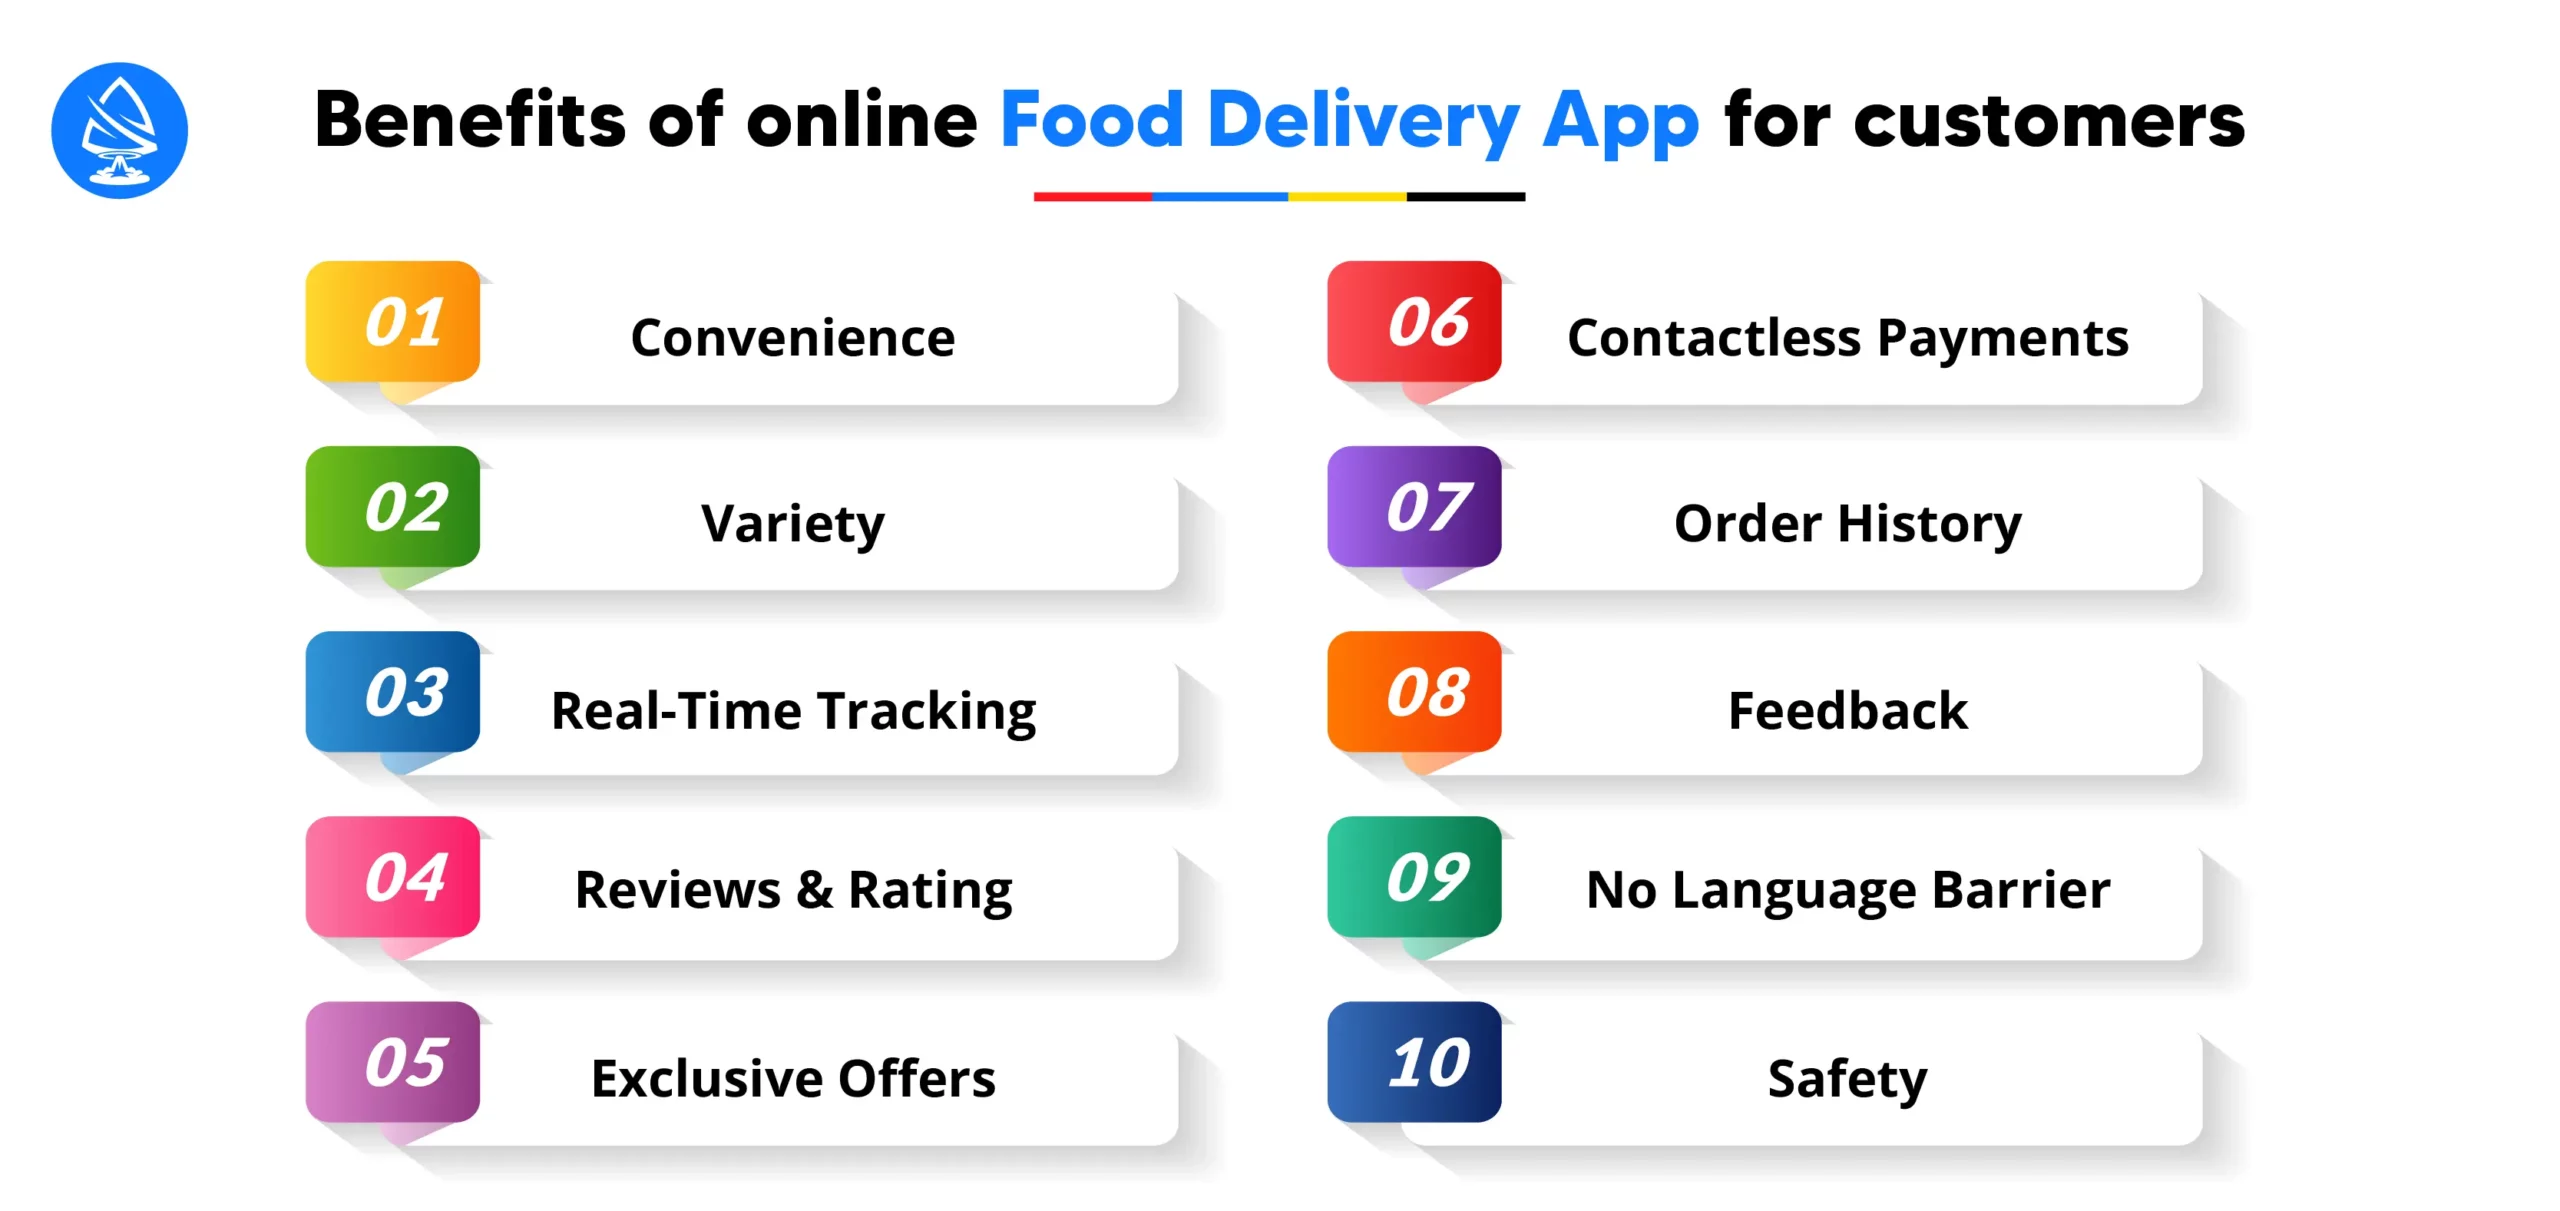 Benefits of online food delivery app for customers